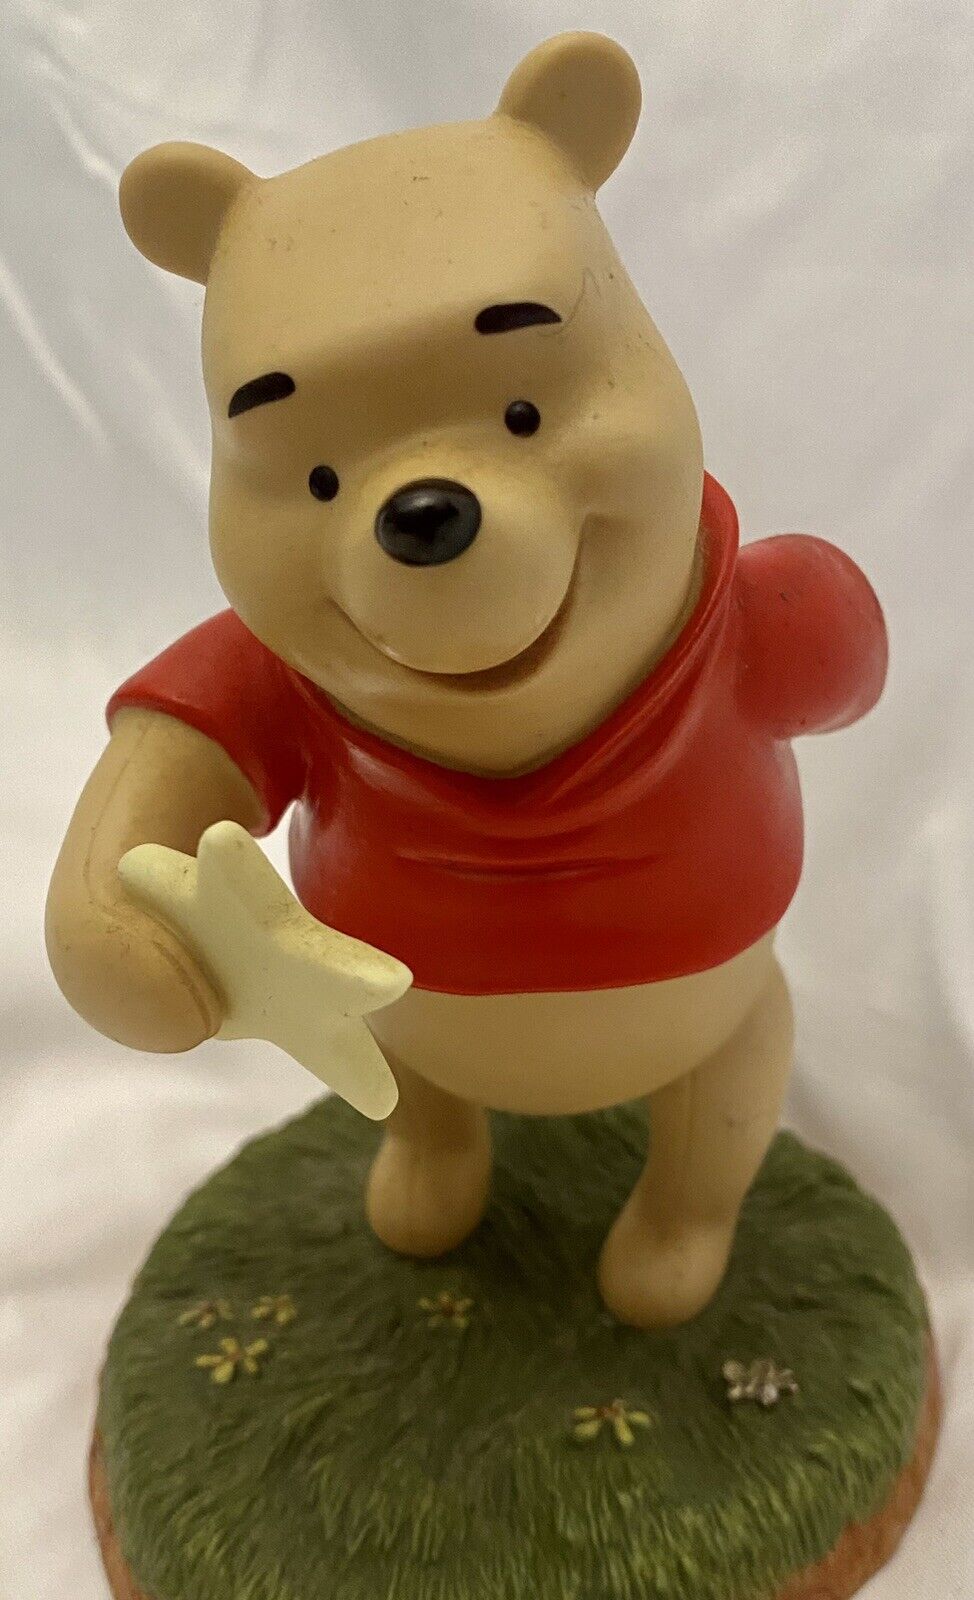 Pooh And Friends Figurine  A Wishing Star To Brighten Your Day Pooh 4\